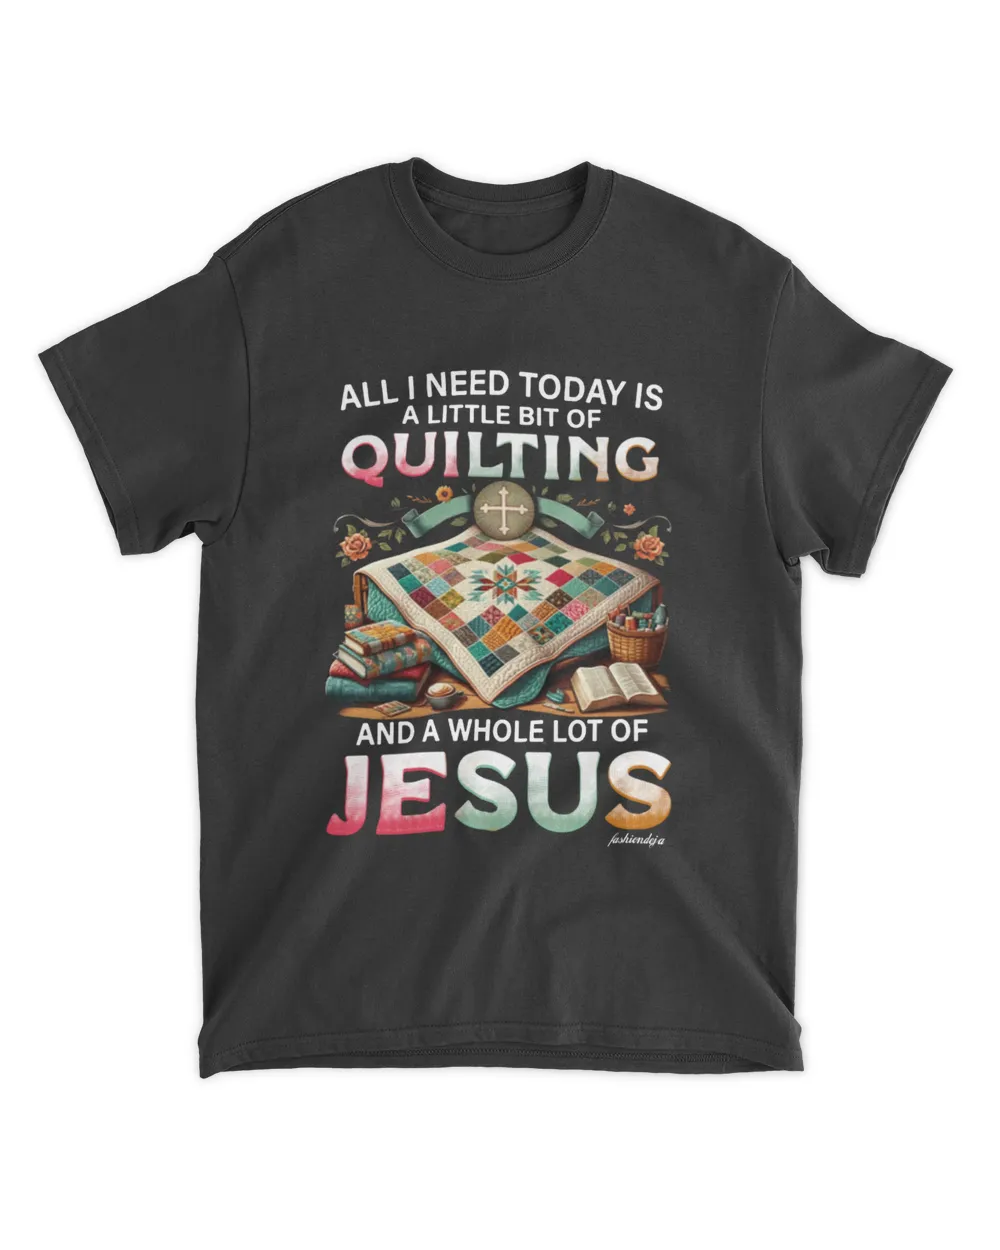 ALL I NEED TODAY IS A LITTLE BIT OF QUILTING AND A WHOLE LOT OF JESUS